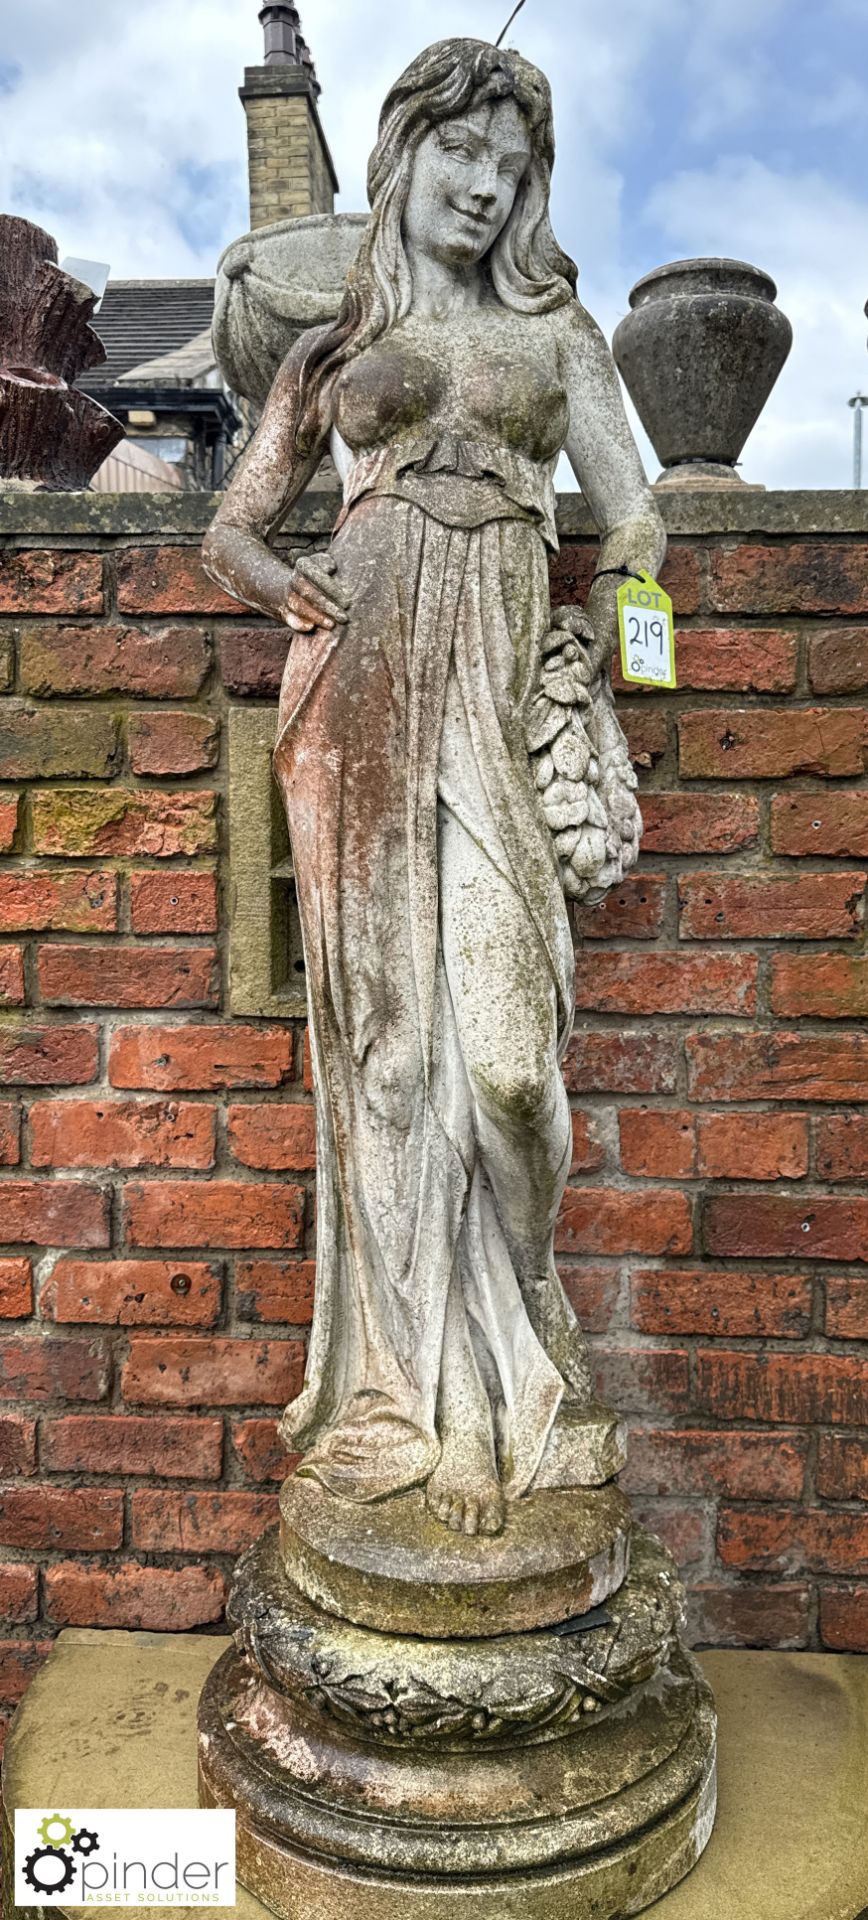 A reconstituted classical marble Statue, depicting young lady carrying a laurel wreath, statue stood